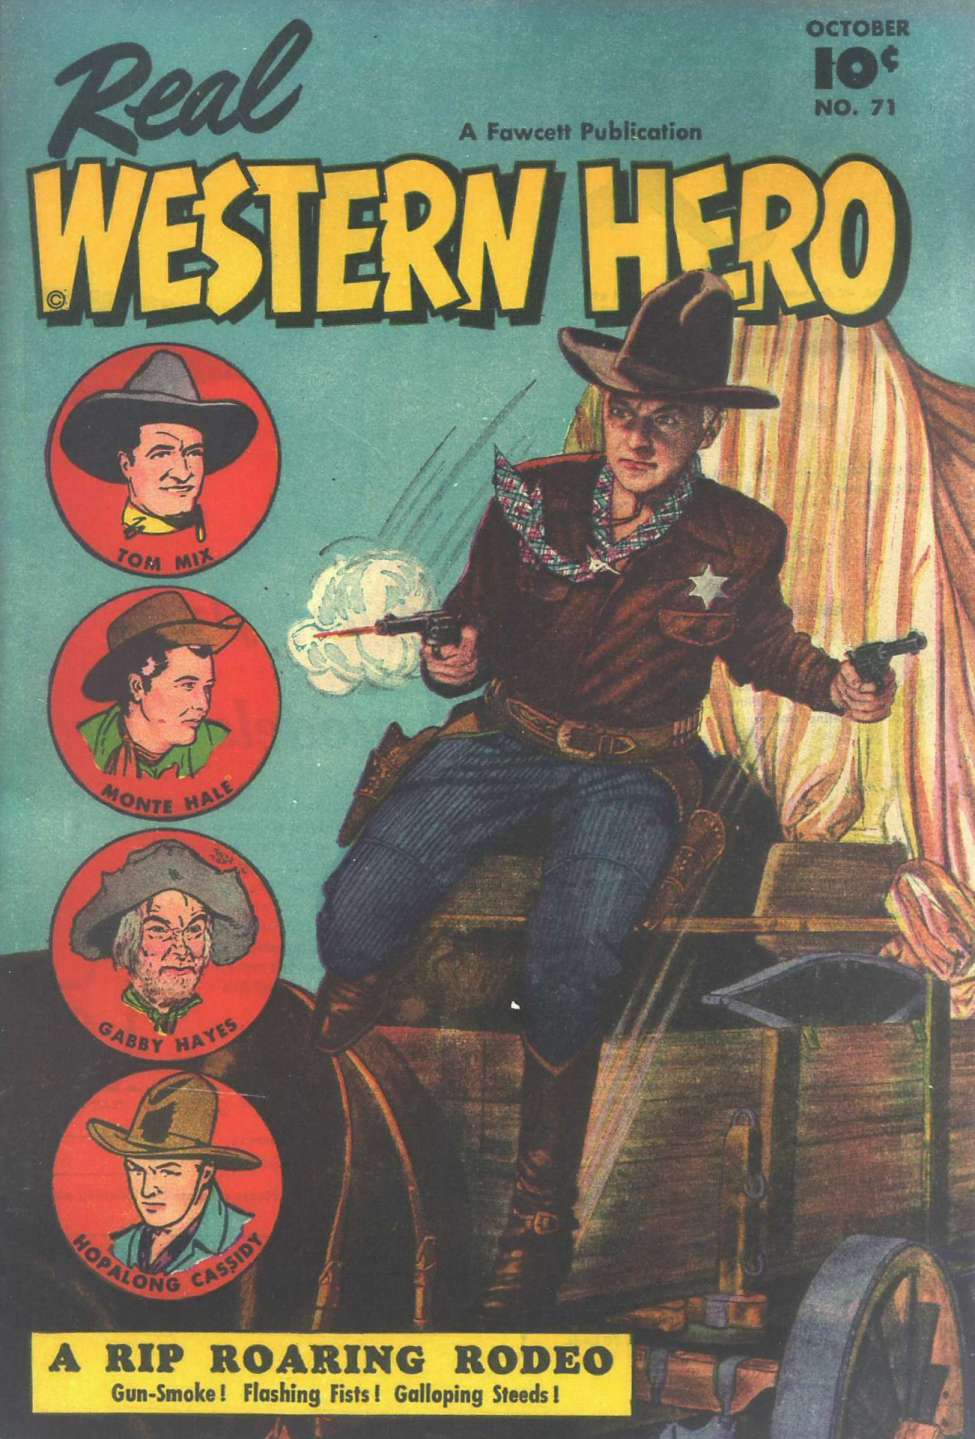 Book Cover For Real Western Hero 71